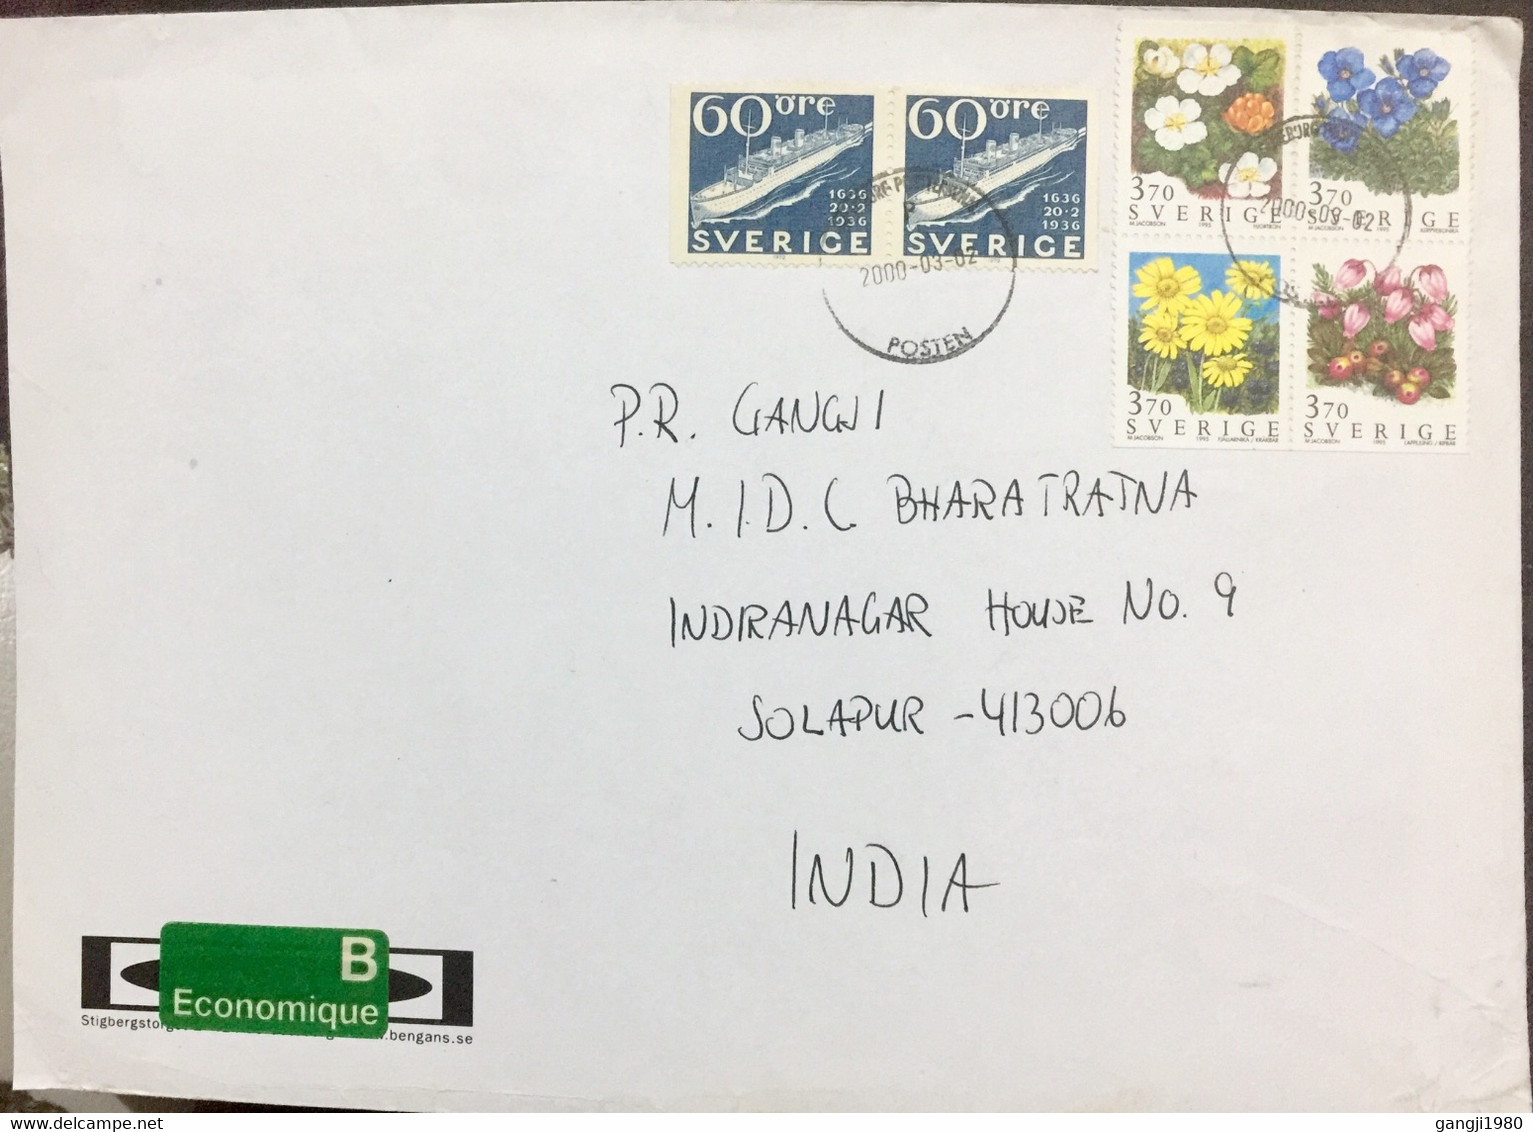 SWEDEN 2000, COVER VIGNETTE ECONOMIQUE GREEN LABEL USED TO INDIA,STAMPS 4 STAMPS FLOWERS BLOCK,SHIP PAIR - Lettres & Documents